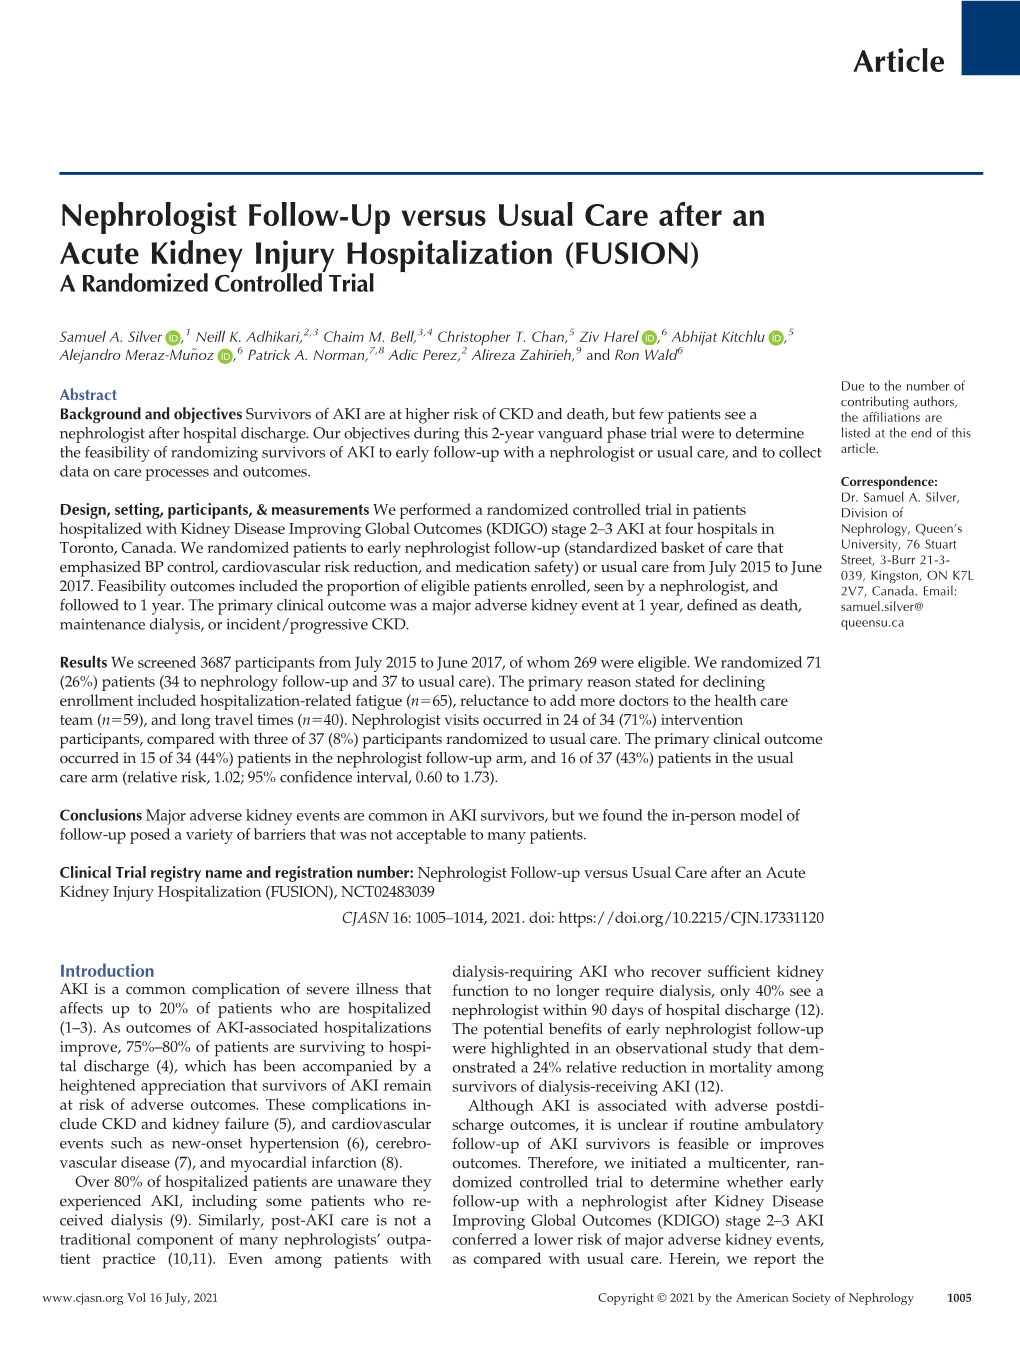 Nephrologist Follow-Up Versus Usual Care After an Acute Kidney Injury Hospitalization (FUSION) a Randomized Controlled Trial